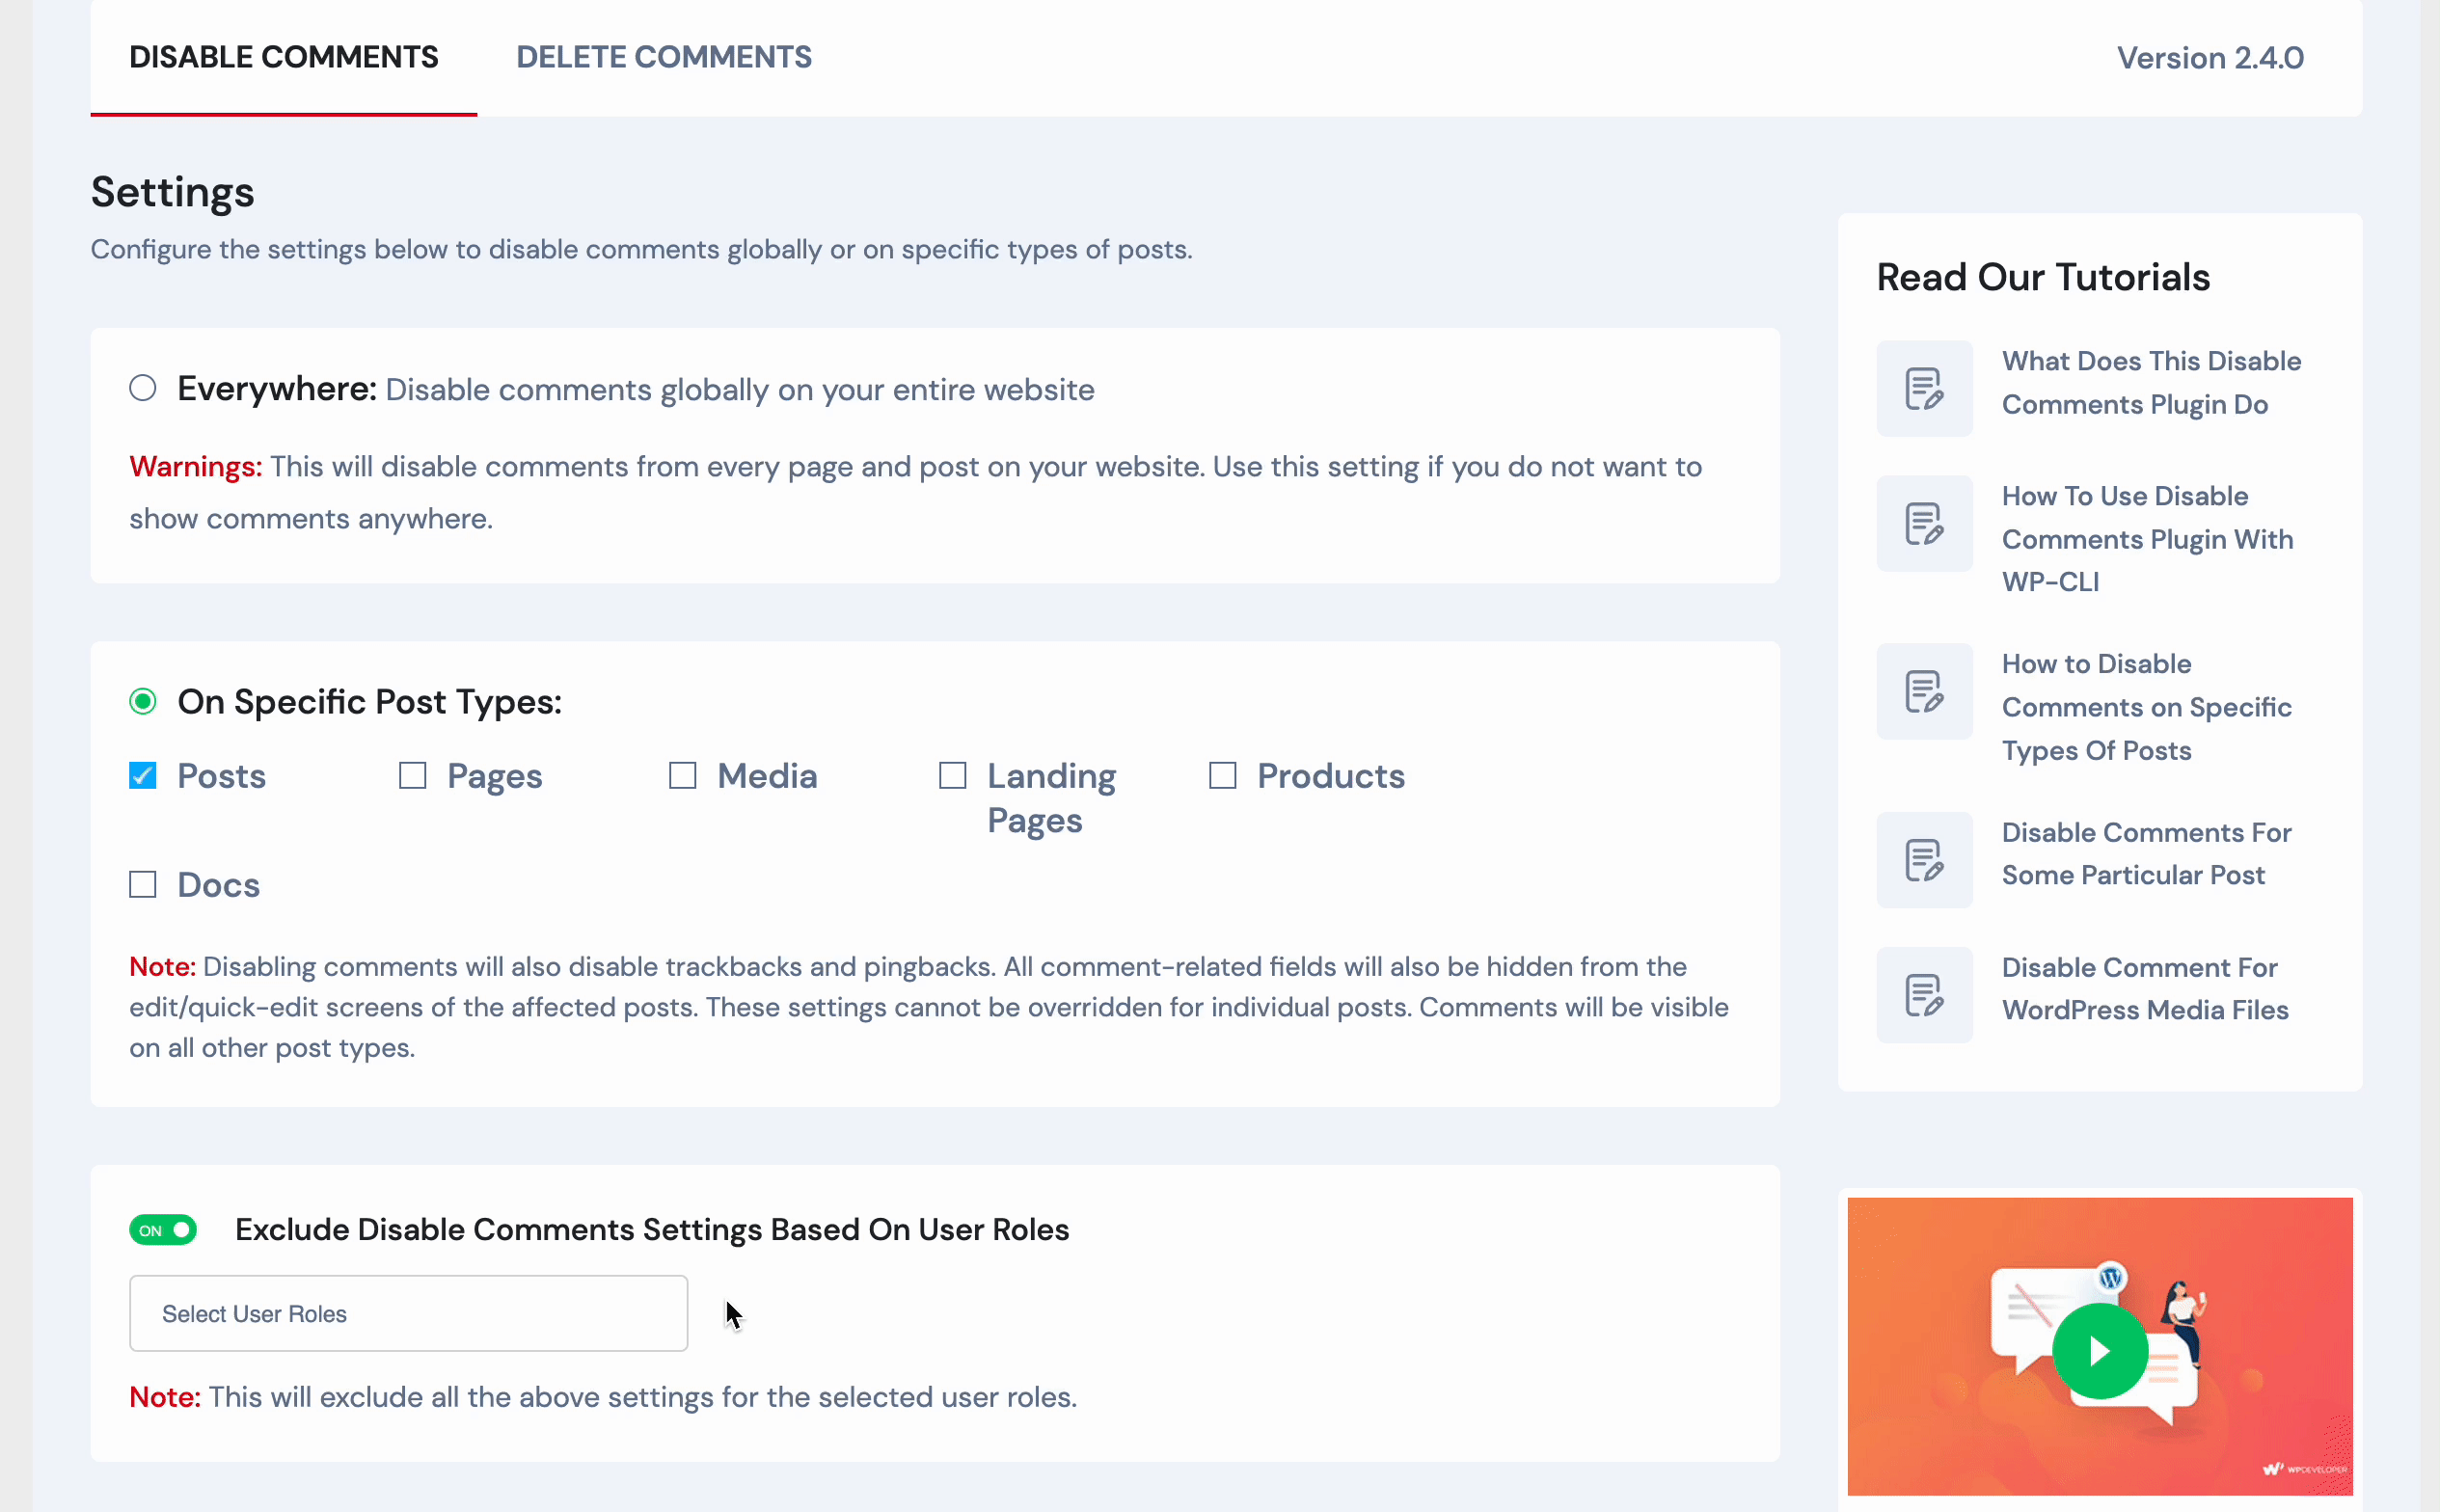 Exclude Disable Comments Settings Based On User Roles